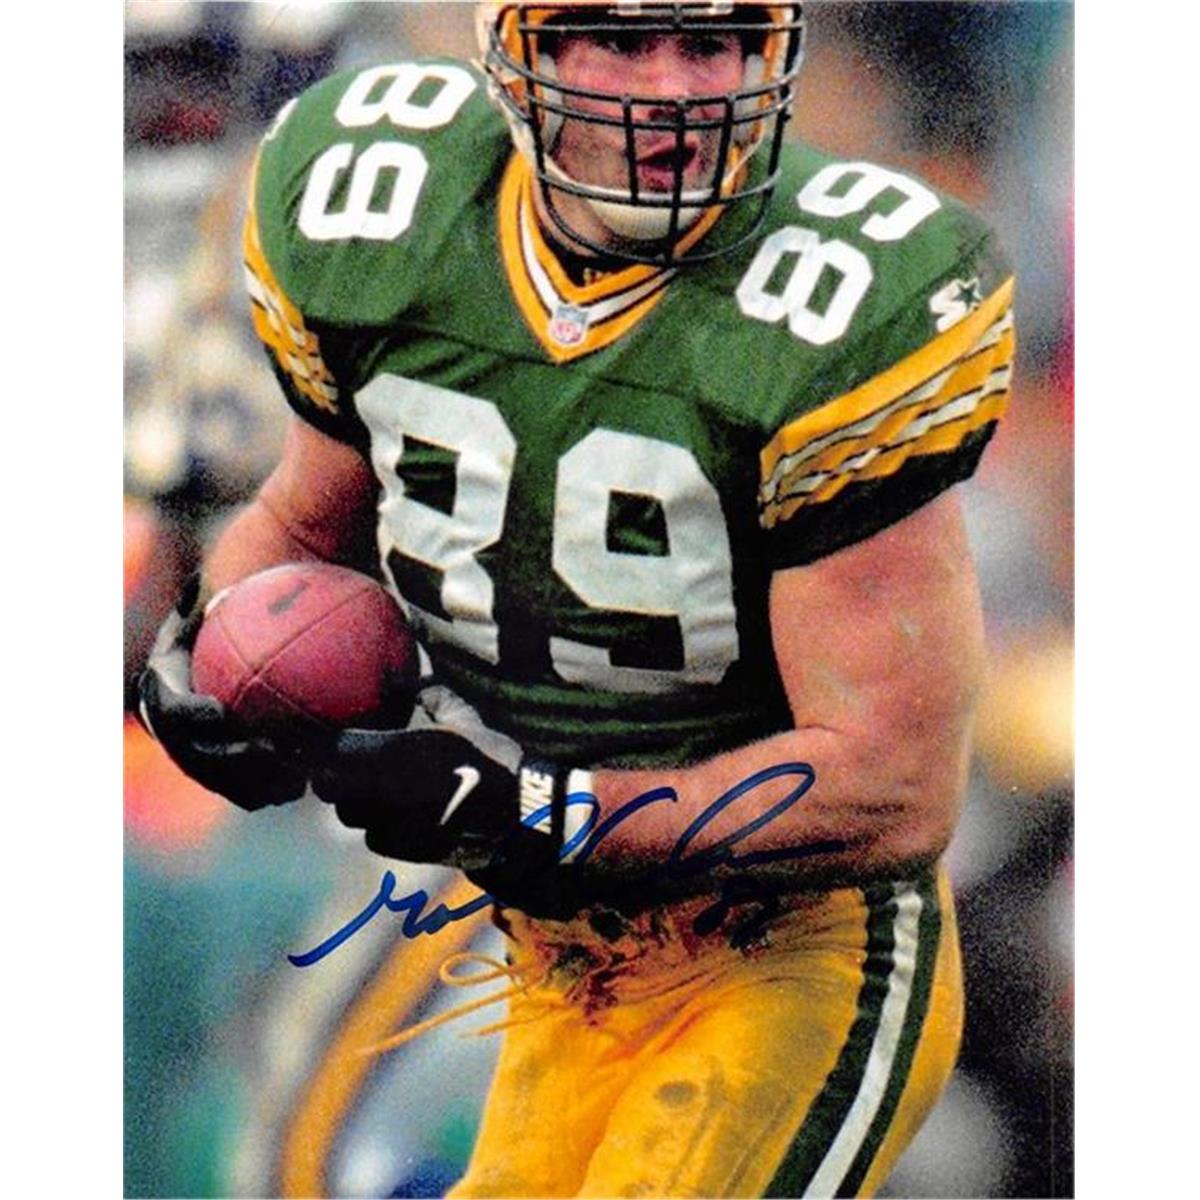 Picture of Autograph Warehouse 409325 8 x 10 in. Mark Chmura Autographed Photo - Green Bay Packers Super Bowl Champion Image No.SC1